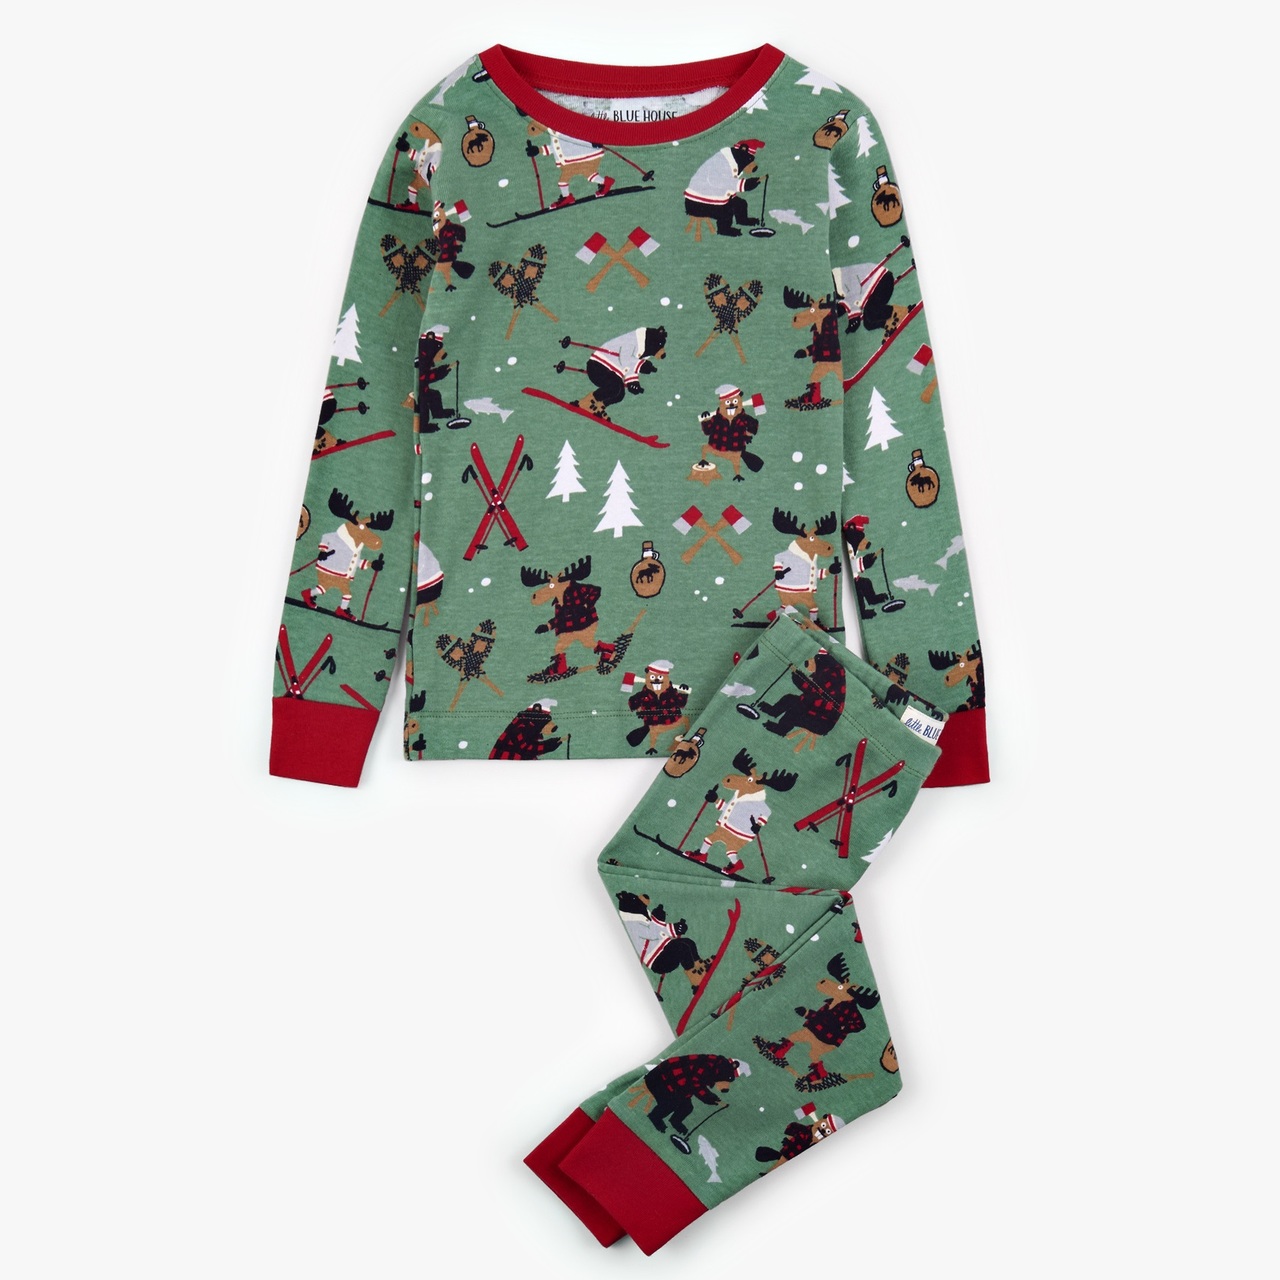 8 Pajama Sets That Are Perfect For Winter - Society19